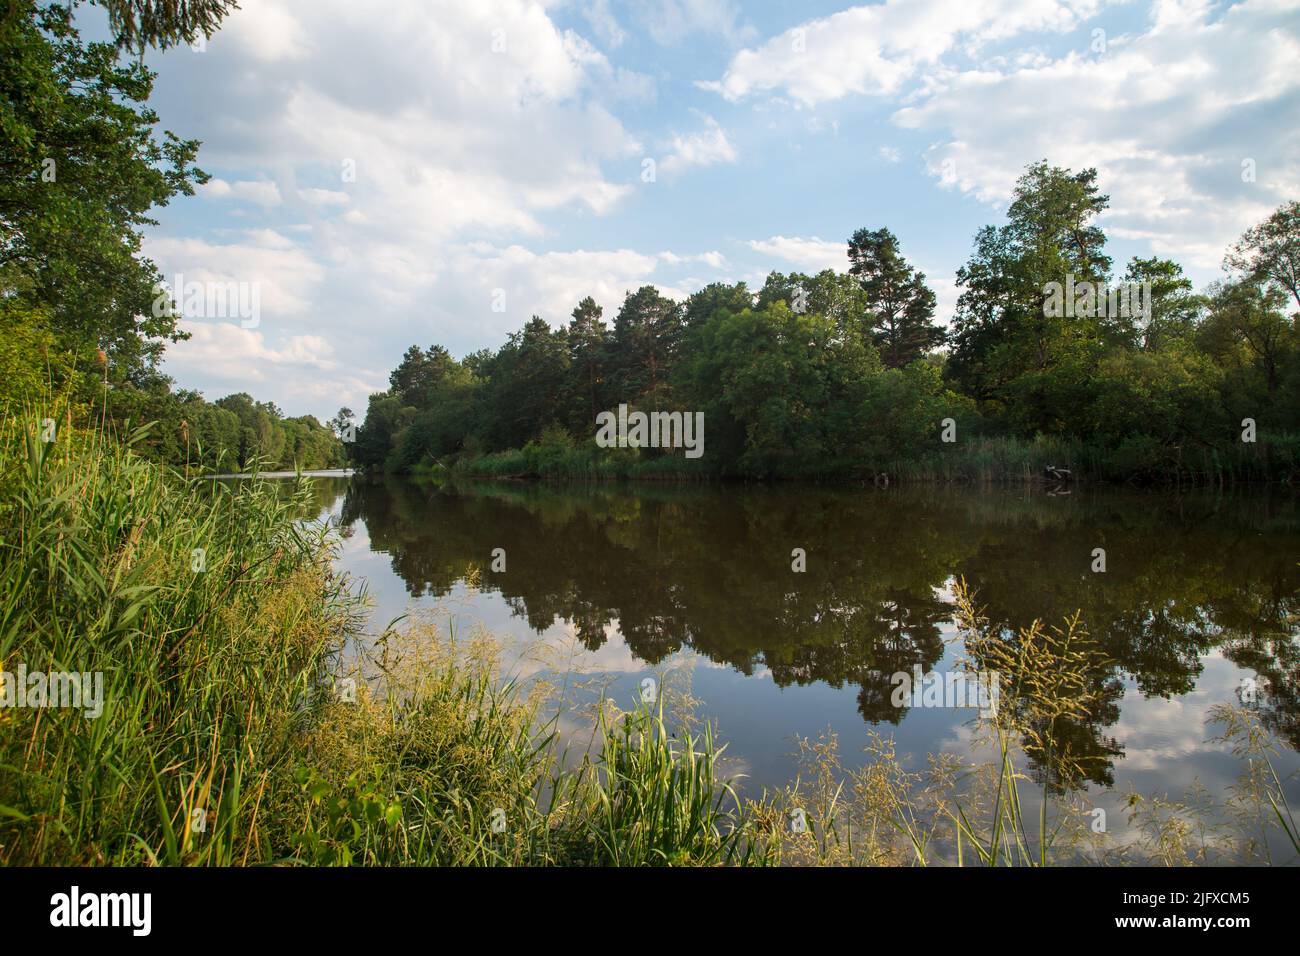 The Neisse river at sunset, photographed from the side of Poland Stock Photo